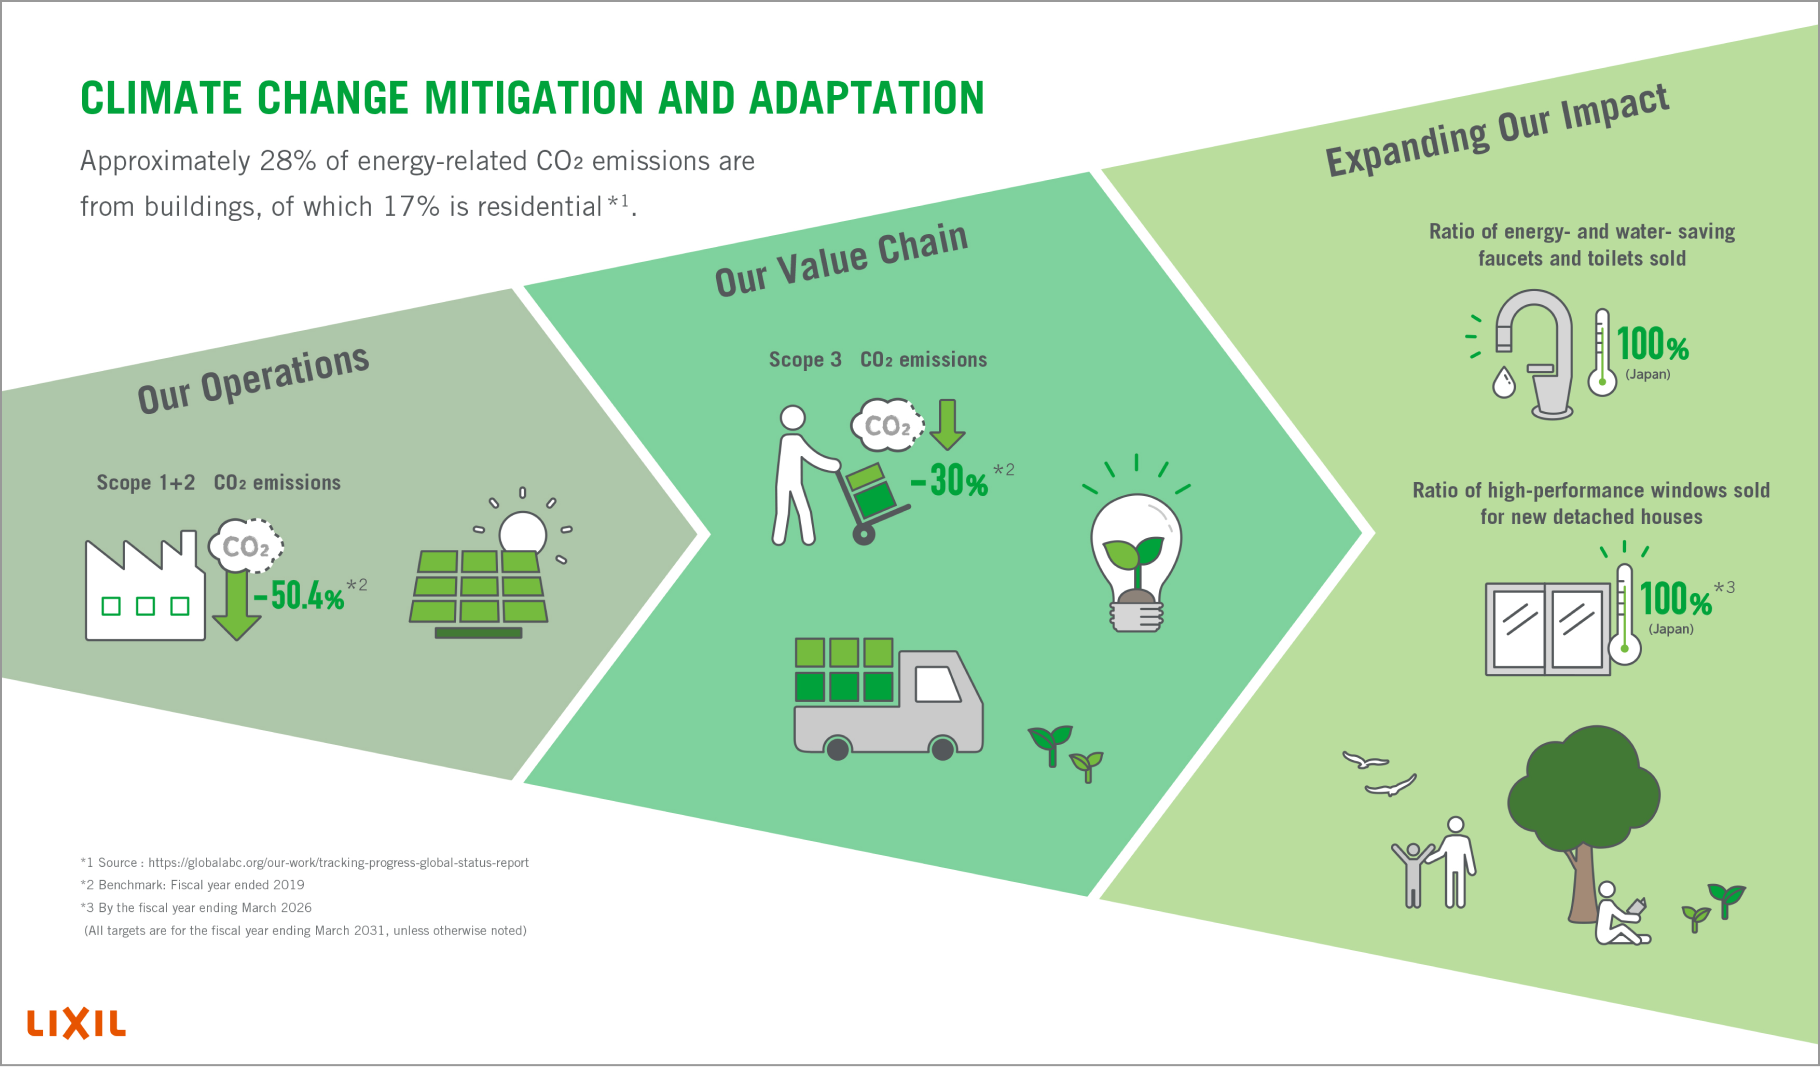 CLIMATE CHANGE MITIGATION AND ADAPTATION: Three Phase Approach